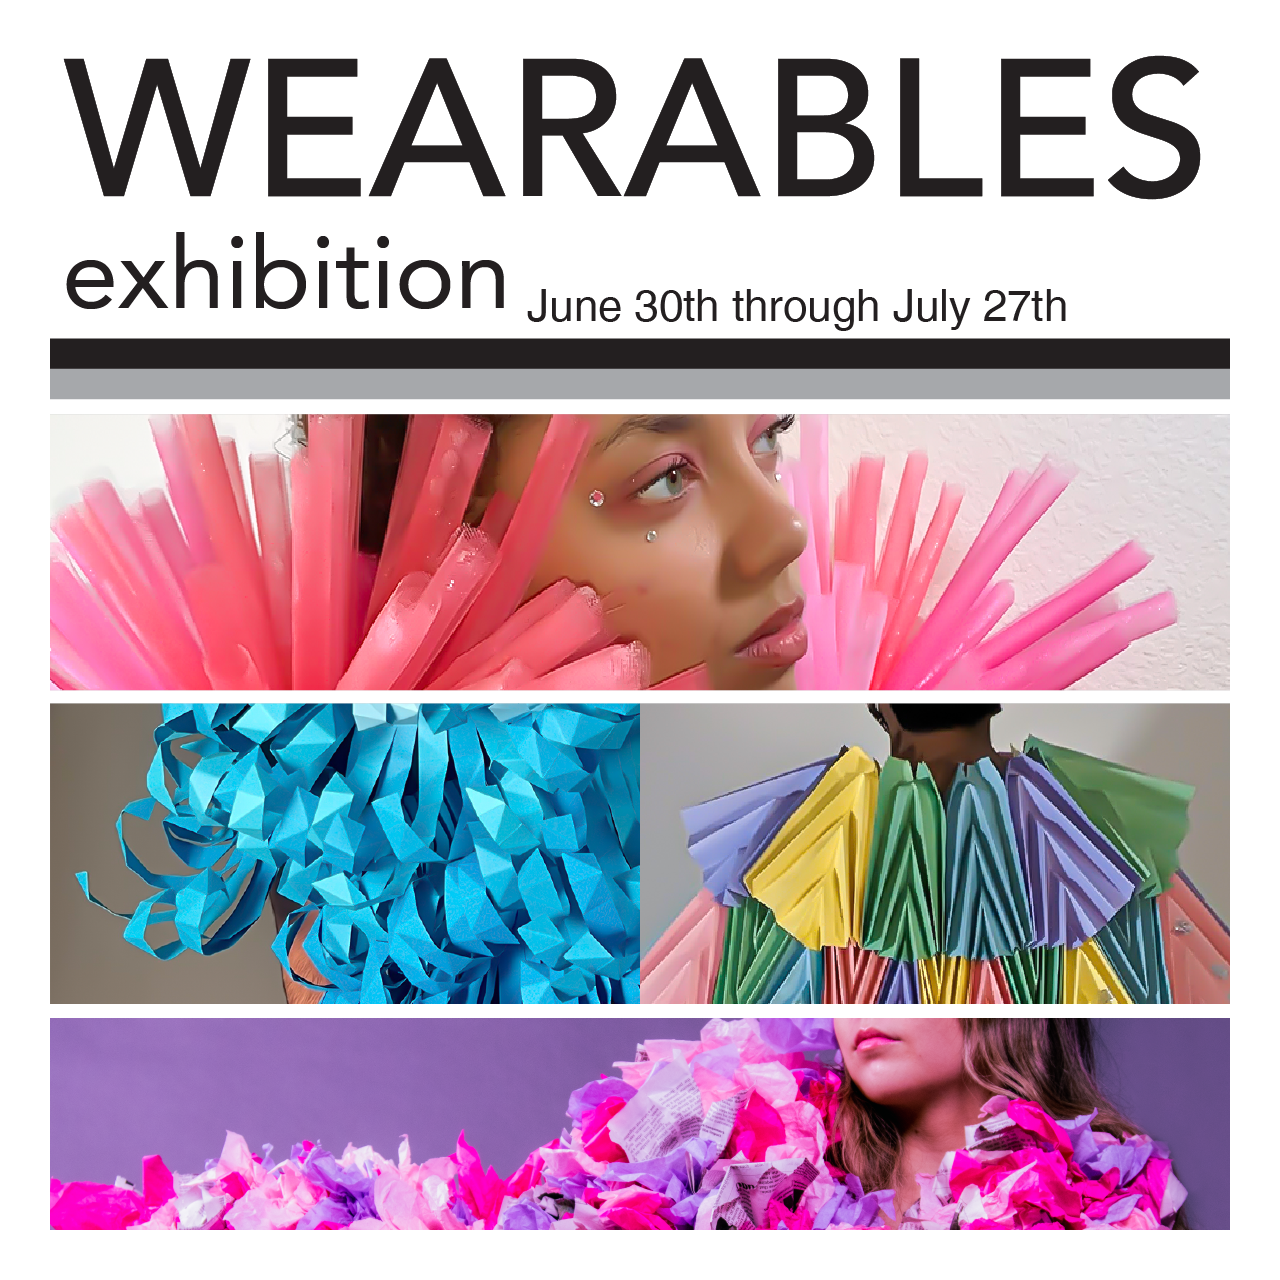 Wearables Exhibition June 30 - July 30